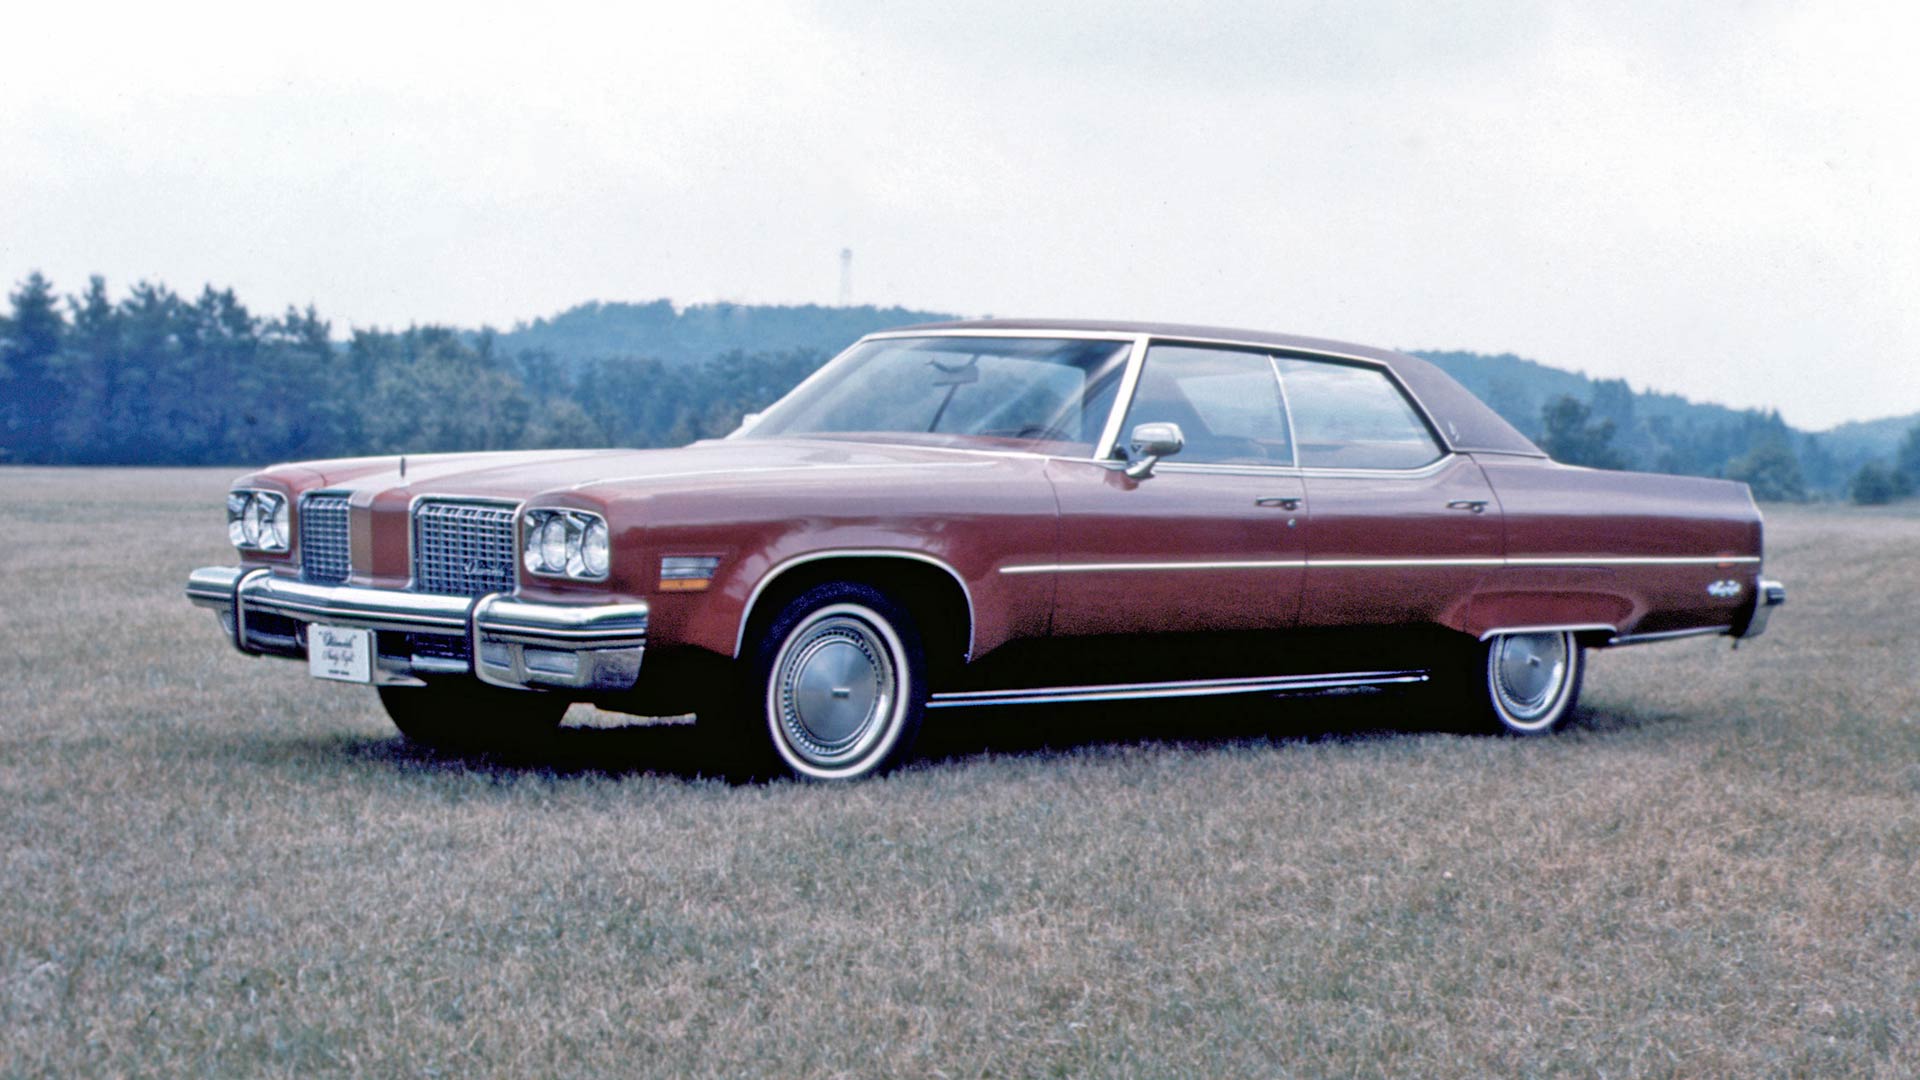 <p>Another giant of the era was the Oldsmobile Ninety-Eight. Before the marque was made to walk the plank in 2004, Oldsmobile was the oldest surviving American car brand. The glory days came in the 1970s, and with cars like the colossal 1974 Ninety-Eight it’s hard not to see why.</p> <p>Plus, any car with a 7.5-liter (455-cubic inch) V8 engine named ‘Rocket’ gains some serious credibility. The record length for ‘74 models came from the need to incorporate federally mandated 5mph bumpers into the already vast design.</p>